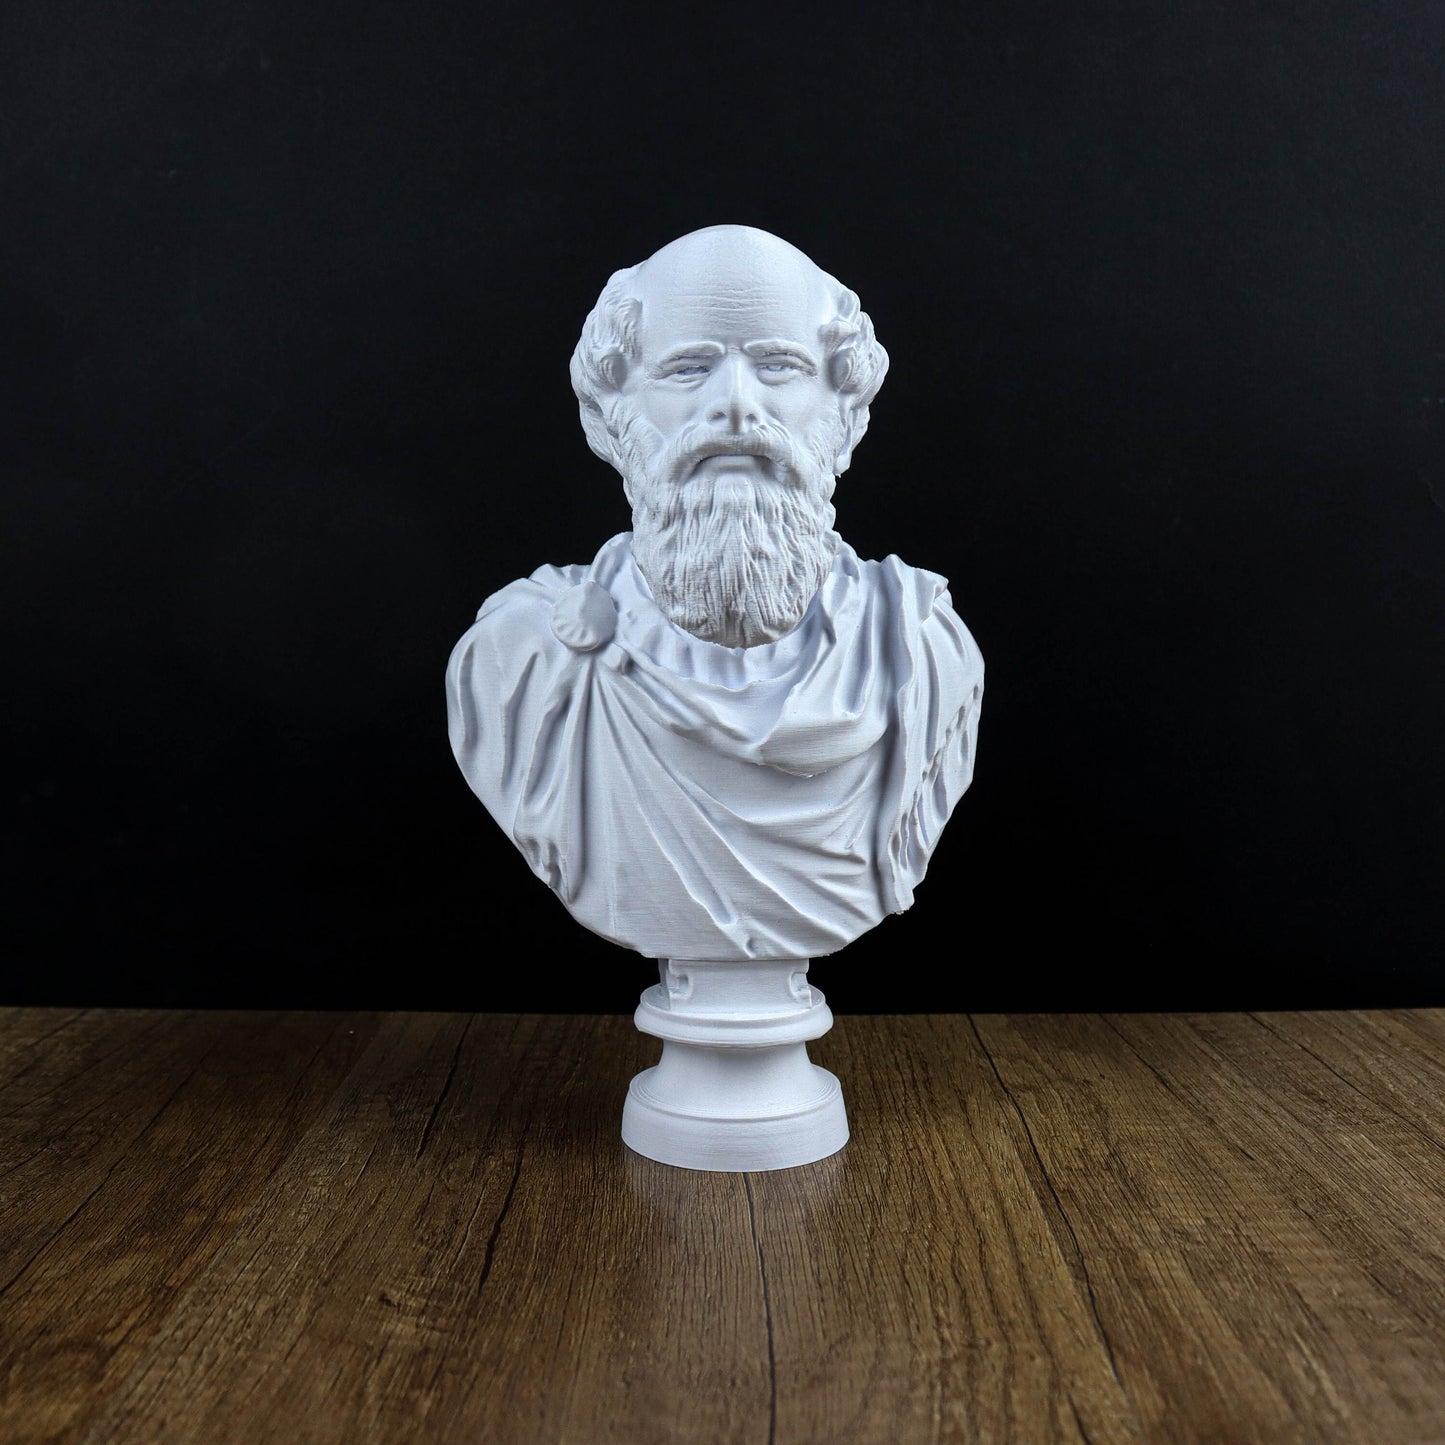 Archimedes Bust, Ancient Mathematician Statue, Greek Mythology Inspired Sculpture